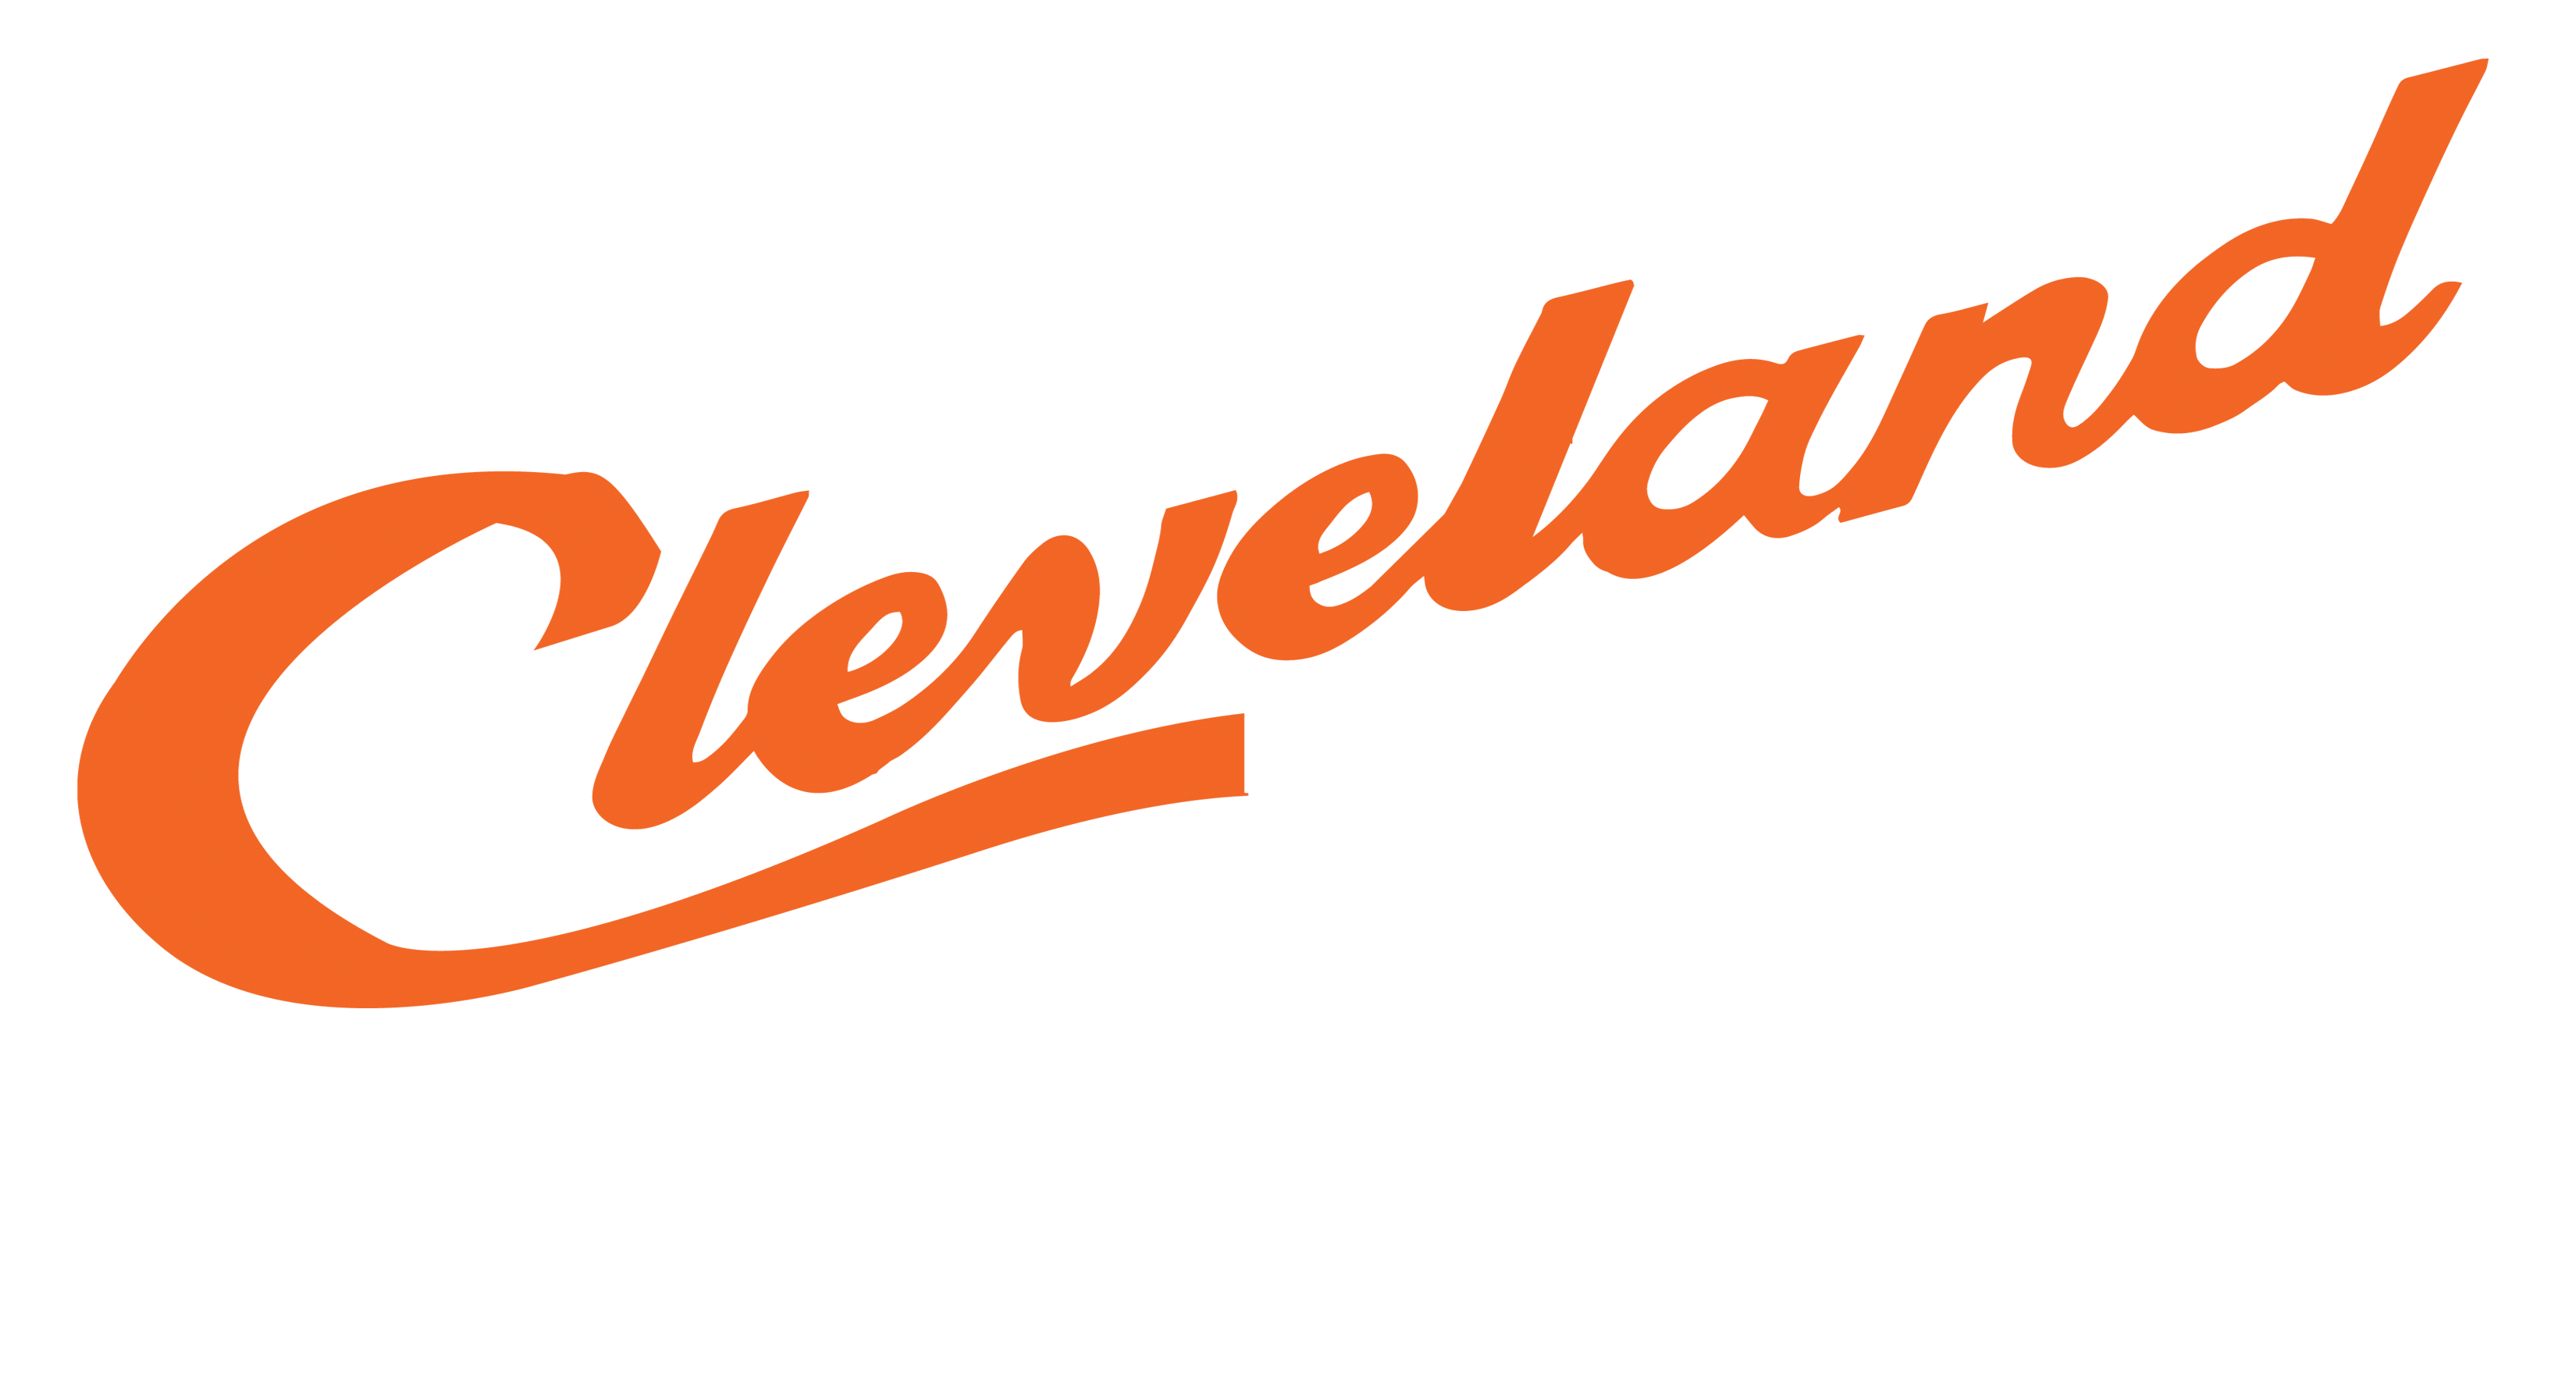 Cleveland Rock And Roll